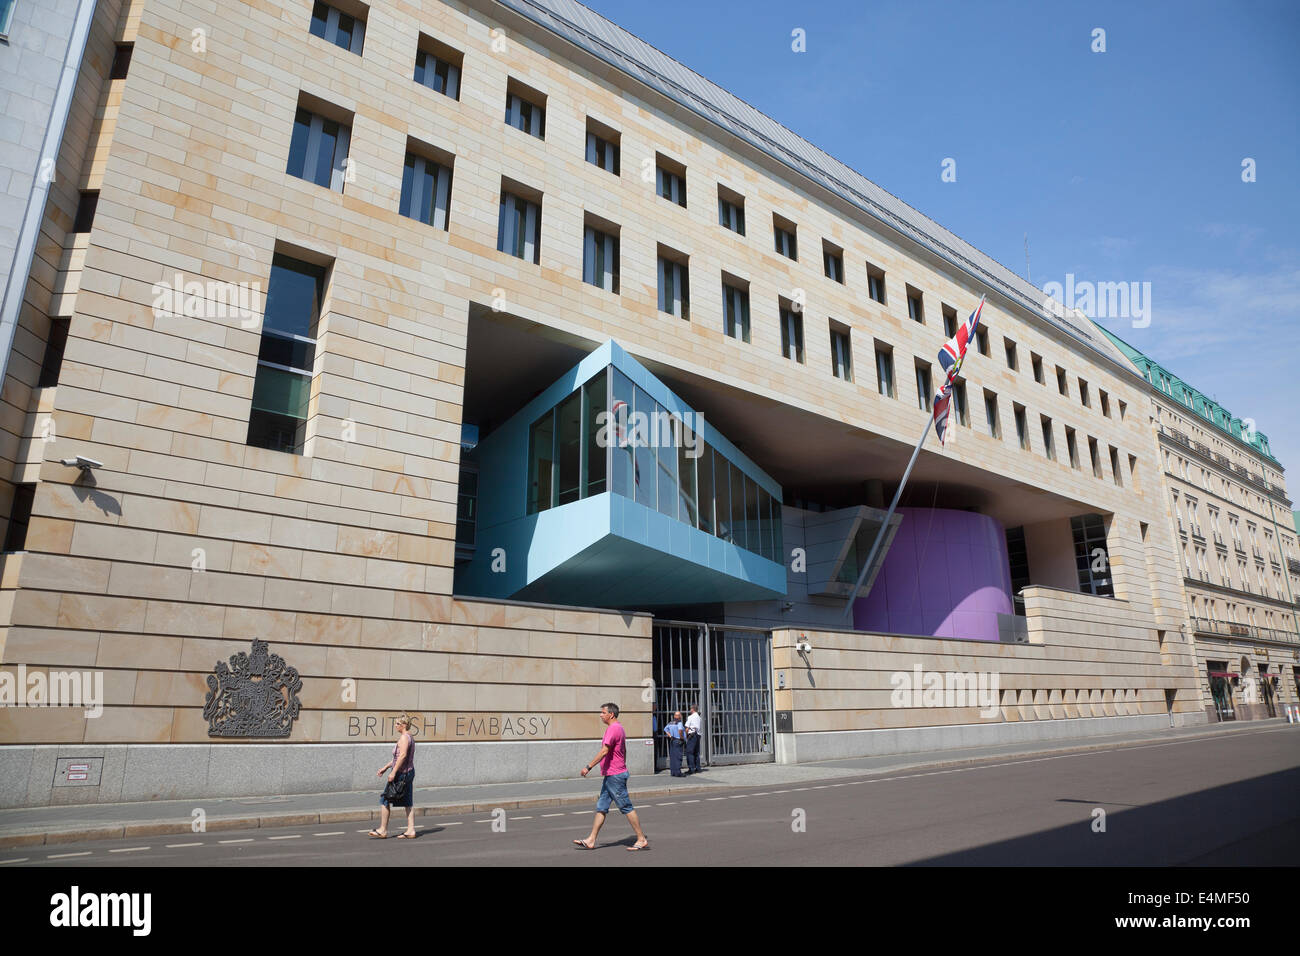 Germany, Berlin, Mitte, Exterior of the British Embassy on Wilhemstrasse designed by Michael Wilford. Stock Photo